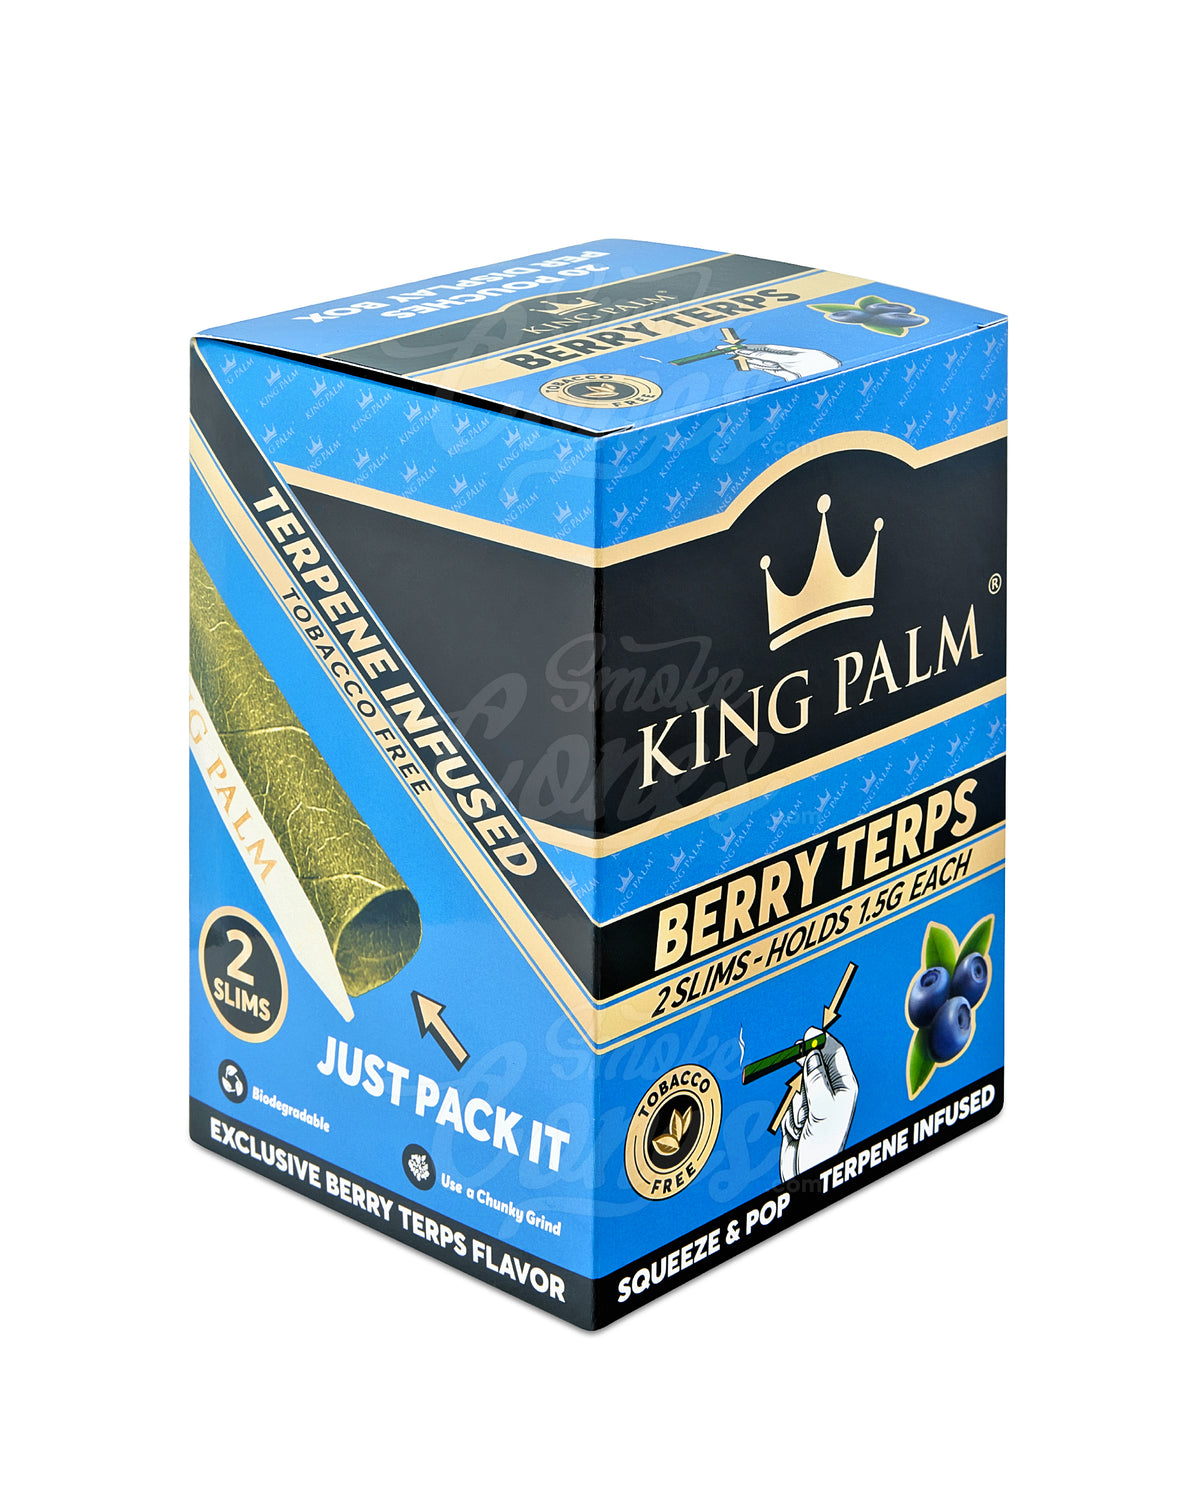 King Palm Berry Terps Natural Slim Leaf Blunt Wraps 20/Box